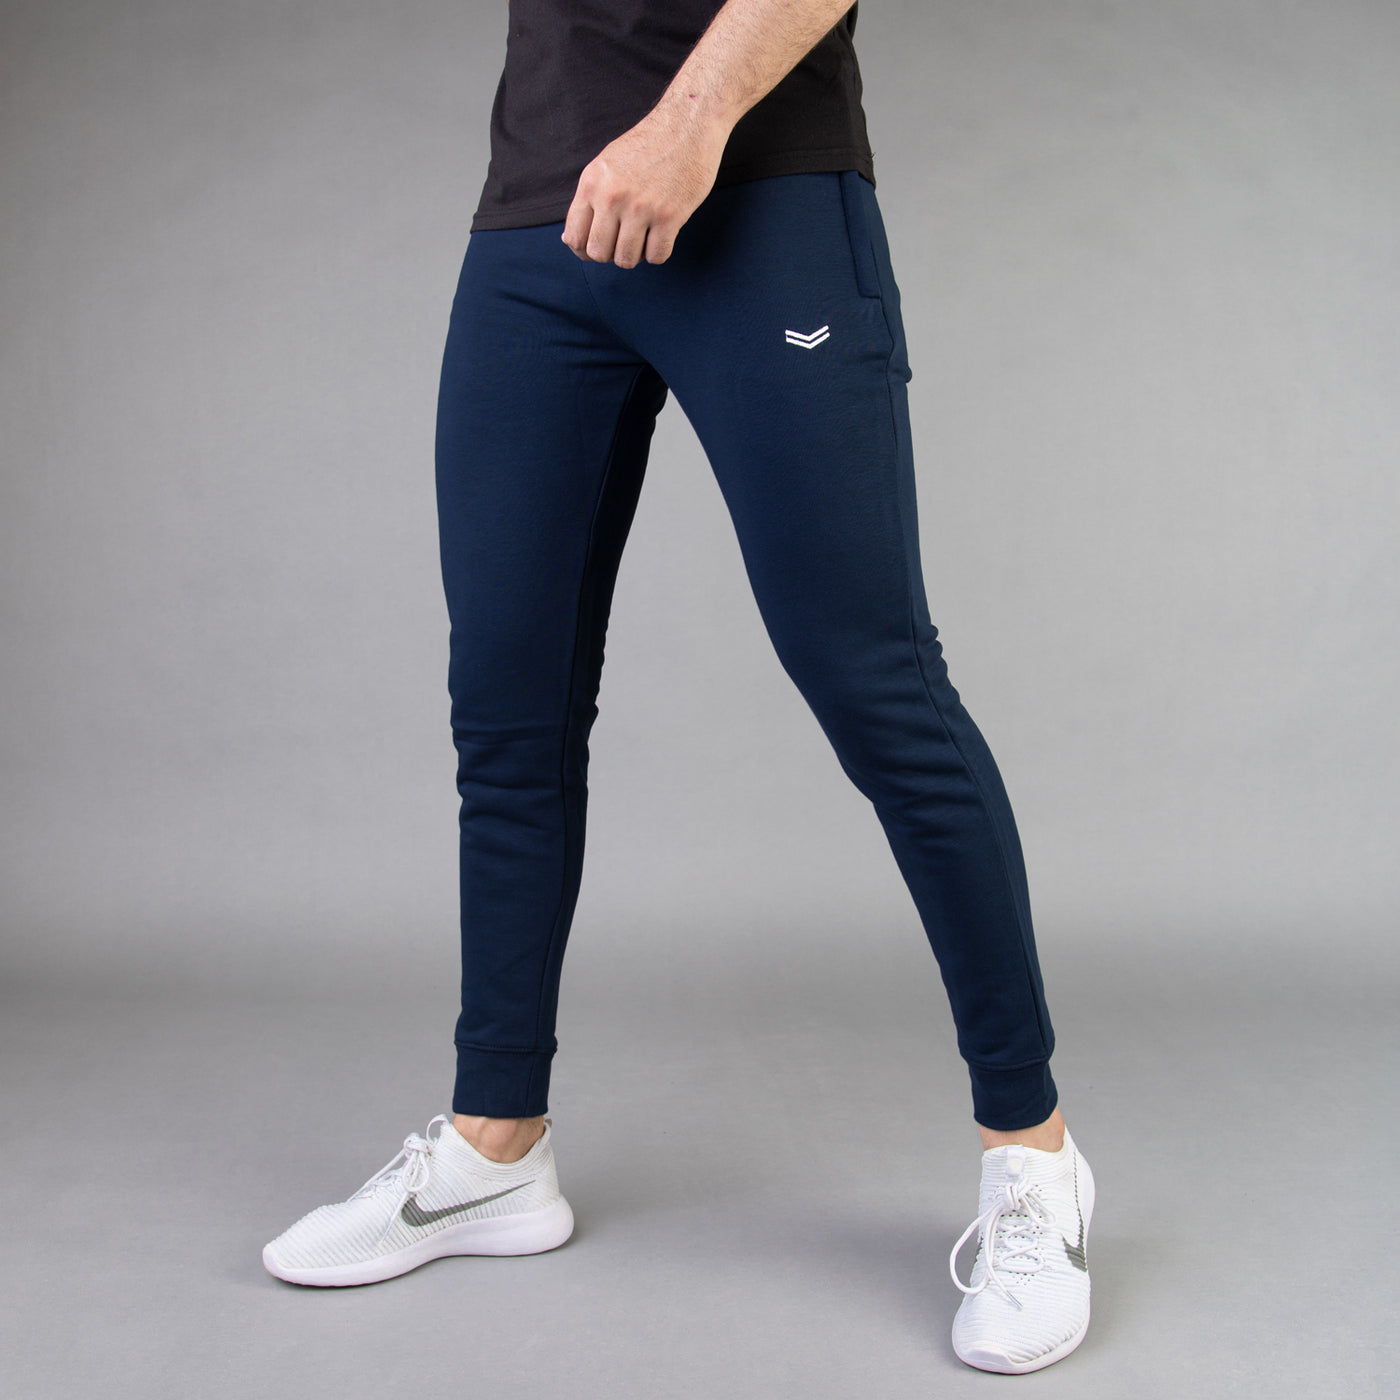 Solid Navy Bottoms with Ribbed Cuffs